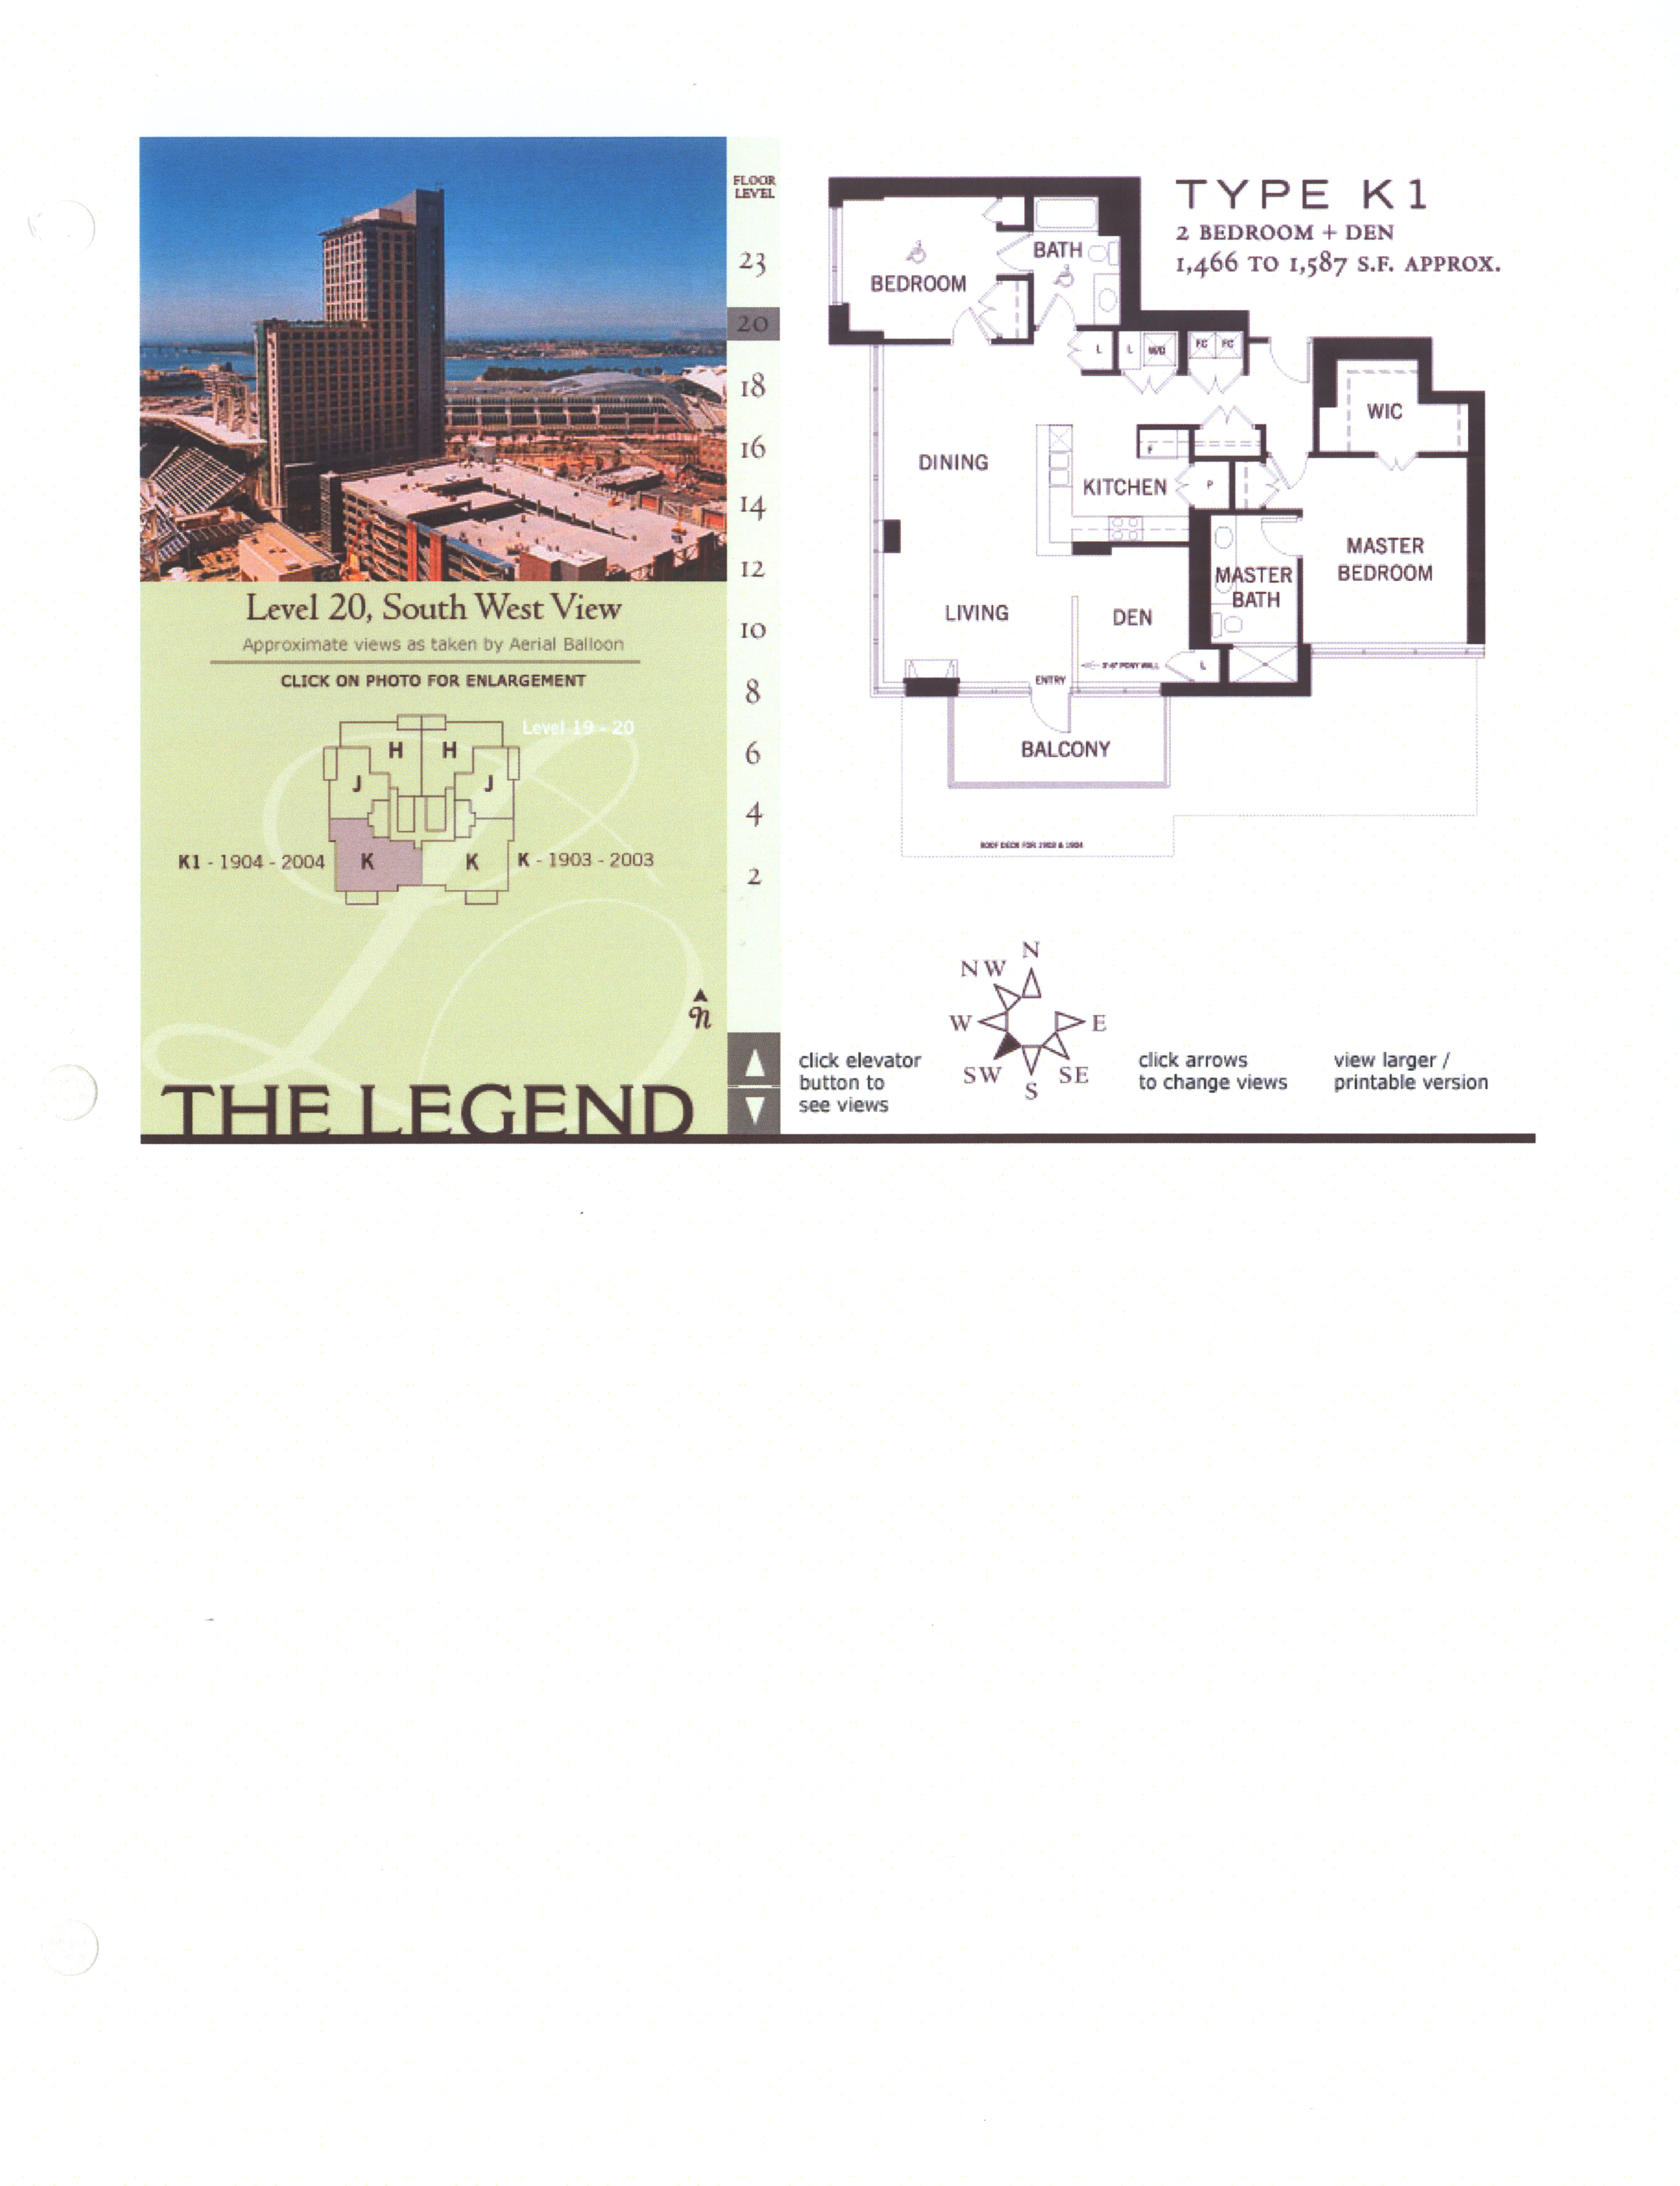 The Legend Floor Plan Level 20. South West View – Type K1